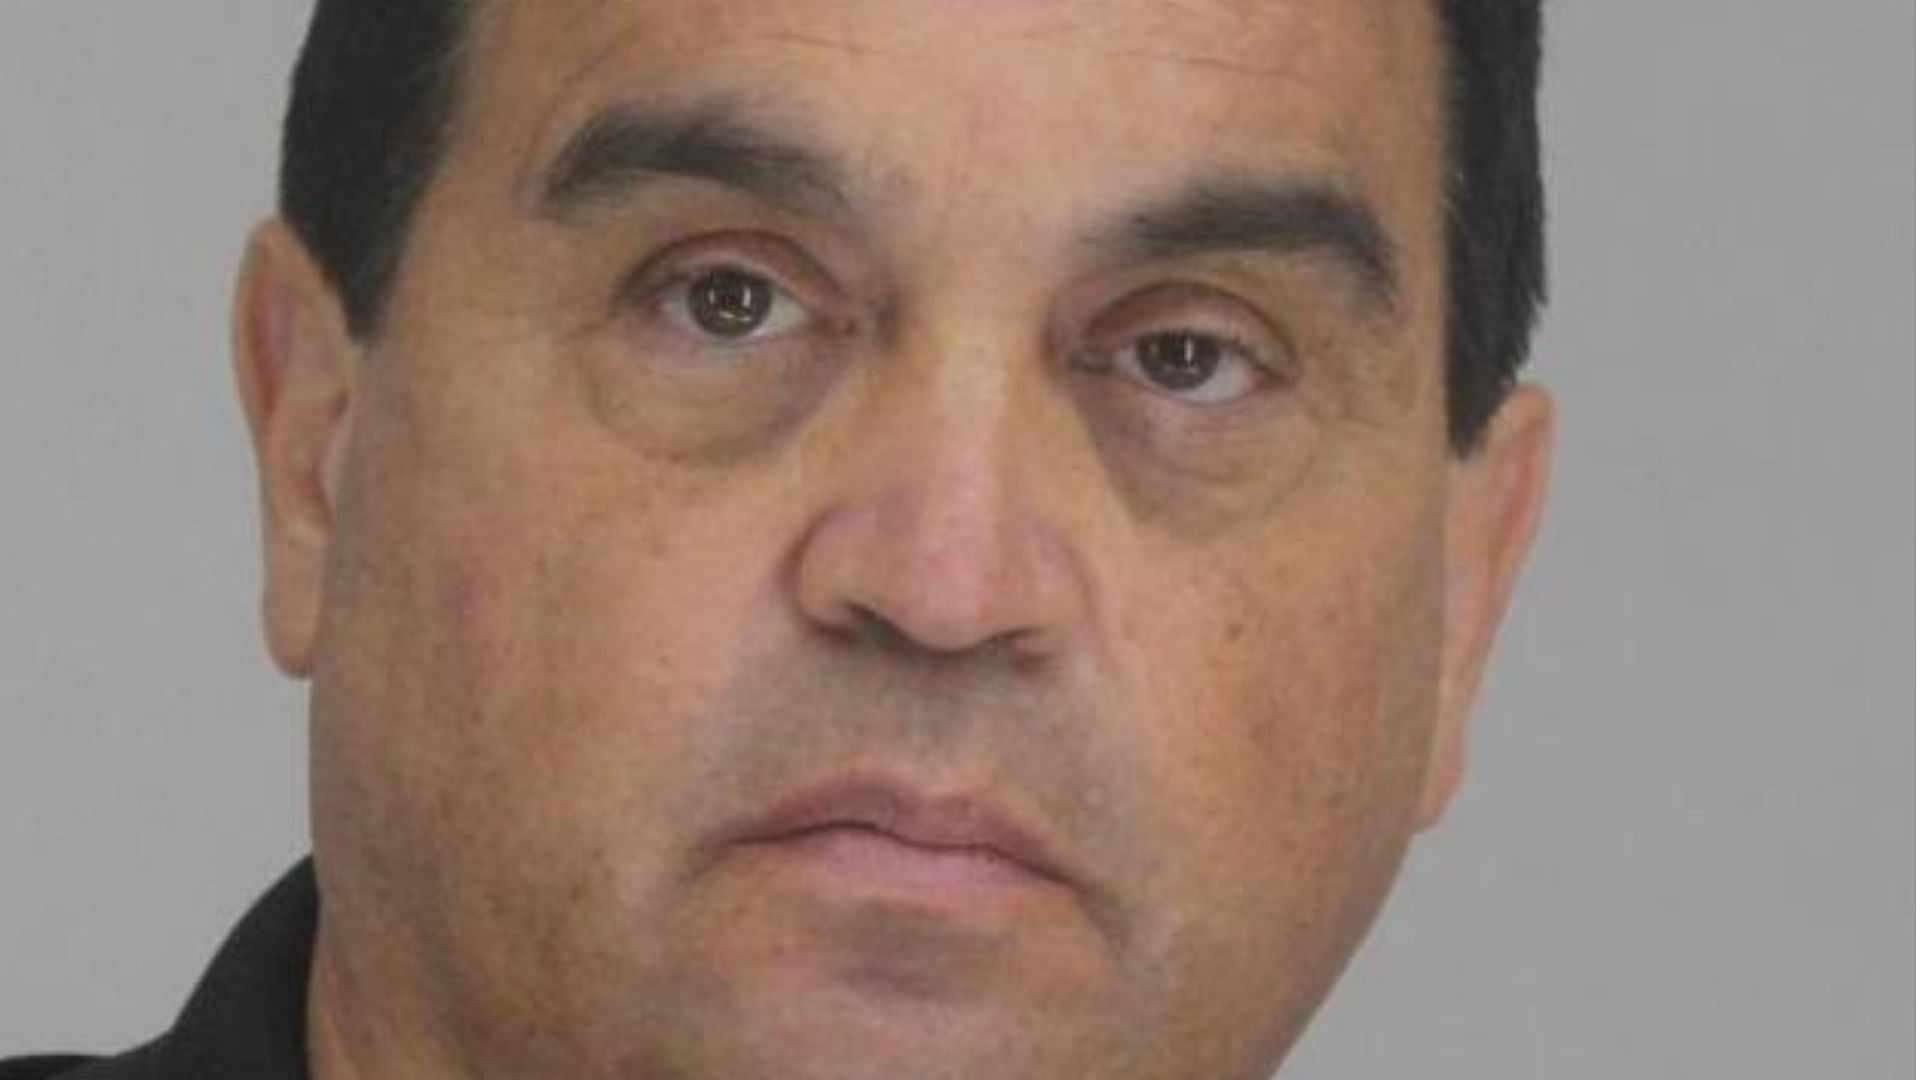 Texas doctor charged with tampering with IV bags and causing the death of an anesthesiologist (Image via Twitter @/wfaaizzy)